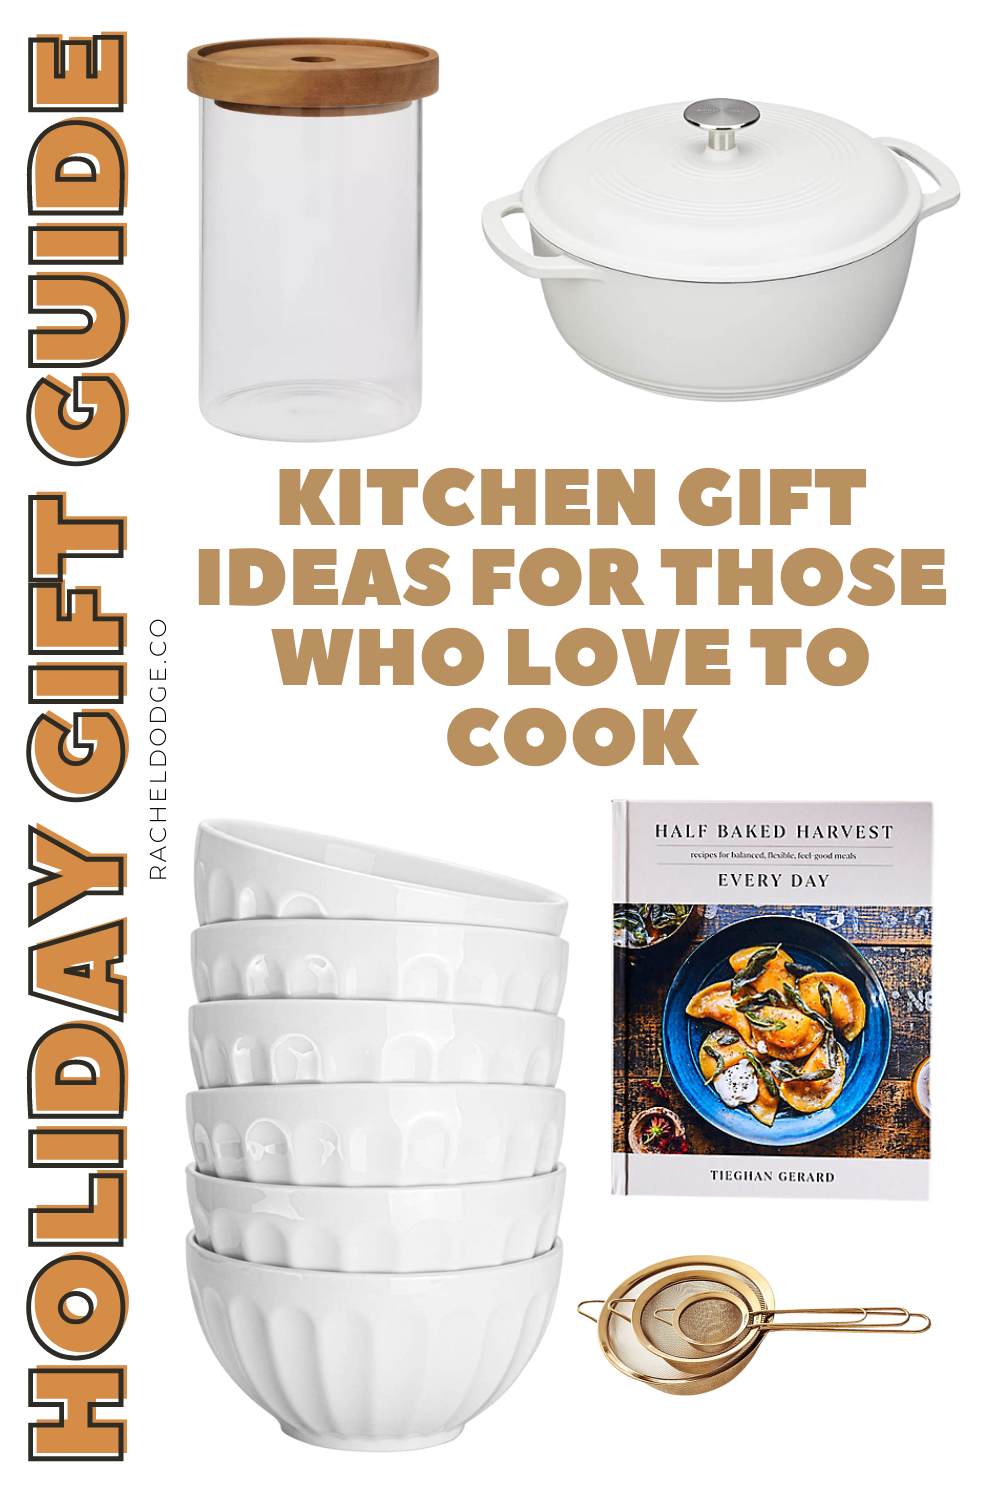 Kitchen Gift Ideas for Those Who Love to Cook
